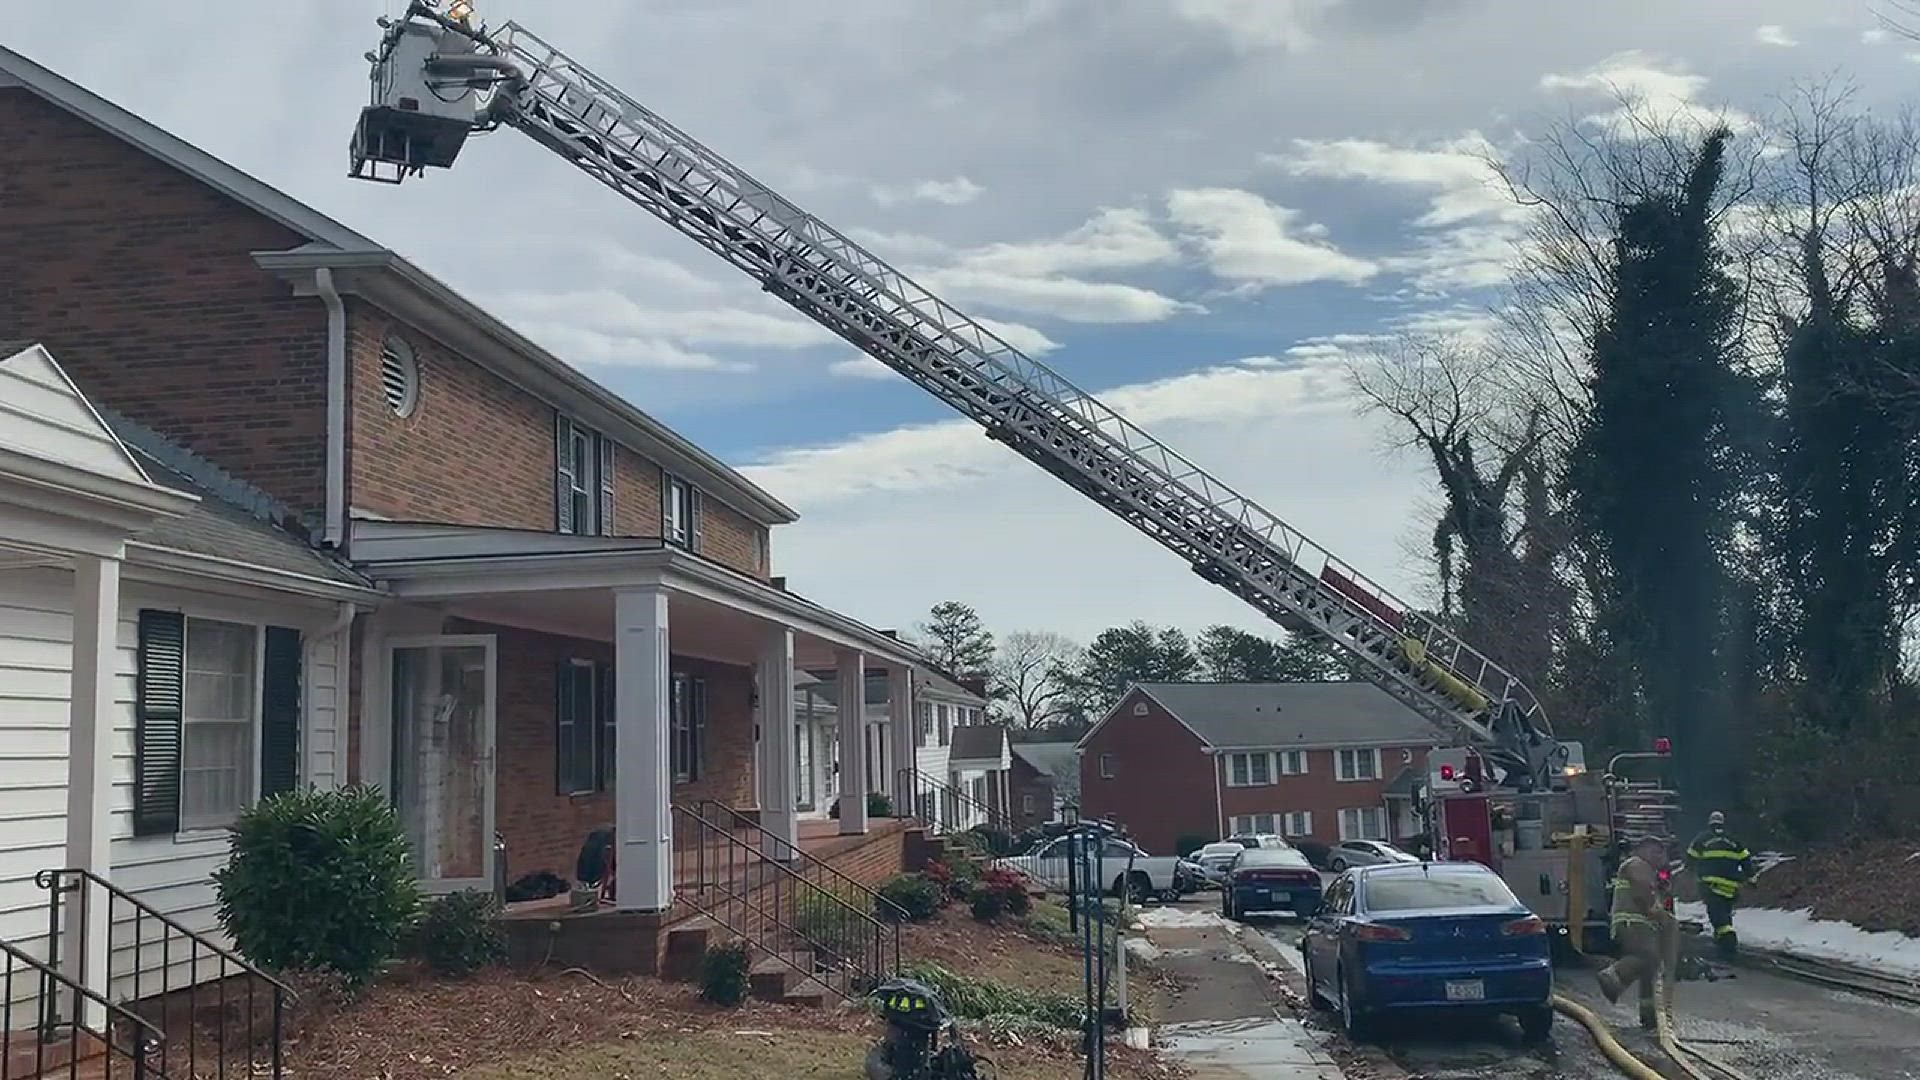 Winston-Salem firefighters put out a house fire started by unattended cooking.